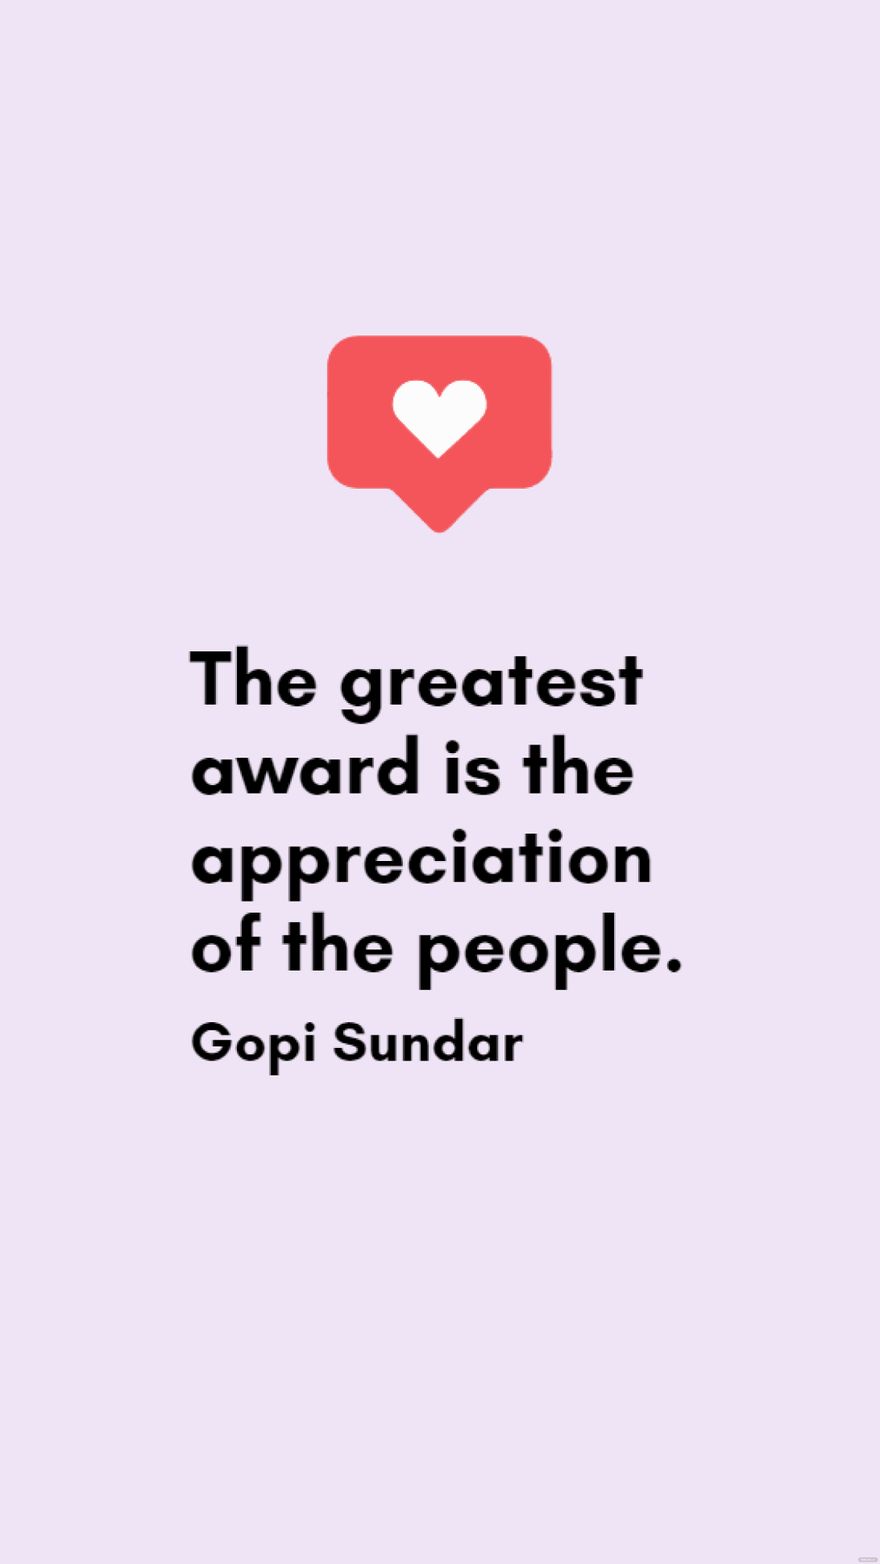 Free Gopi Sundar - The greatest award is the appreciation of the people.